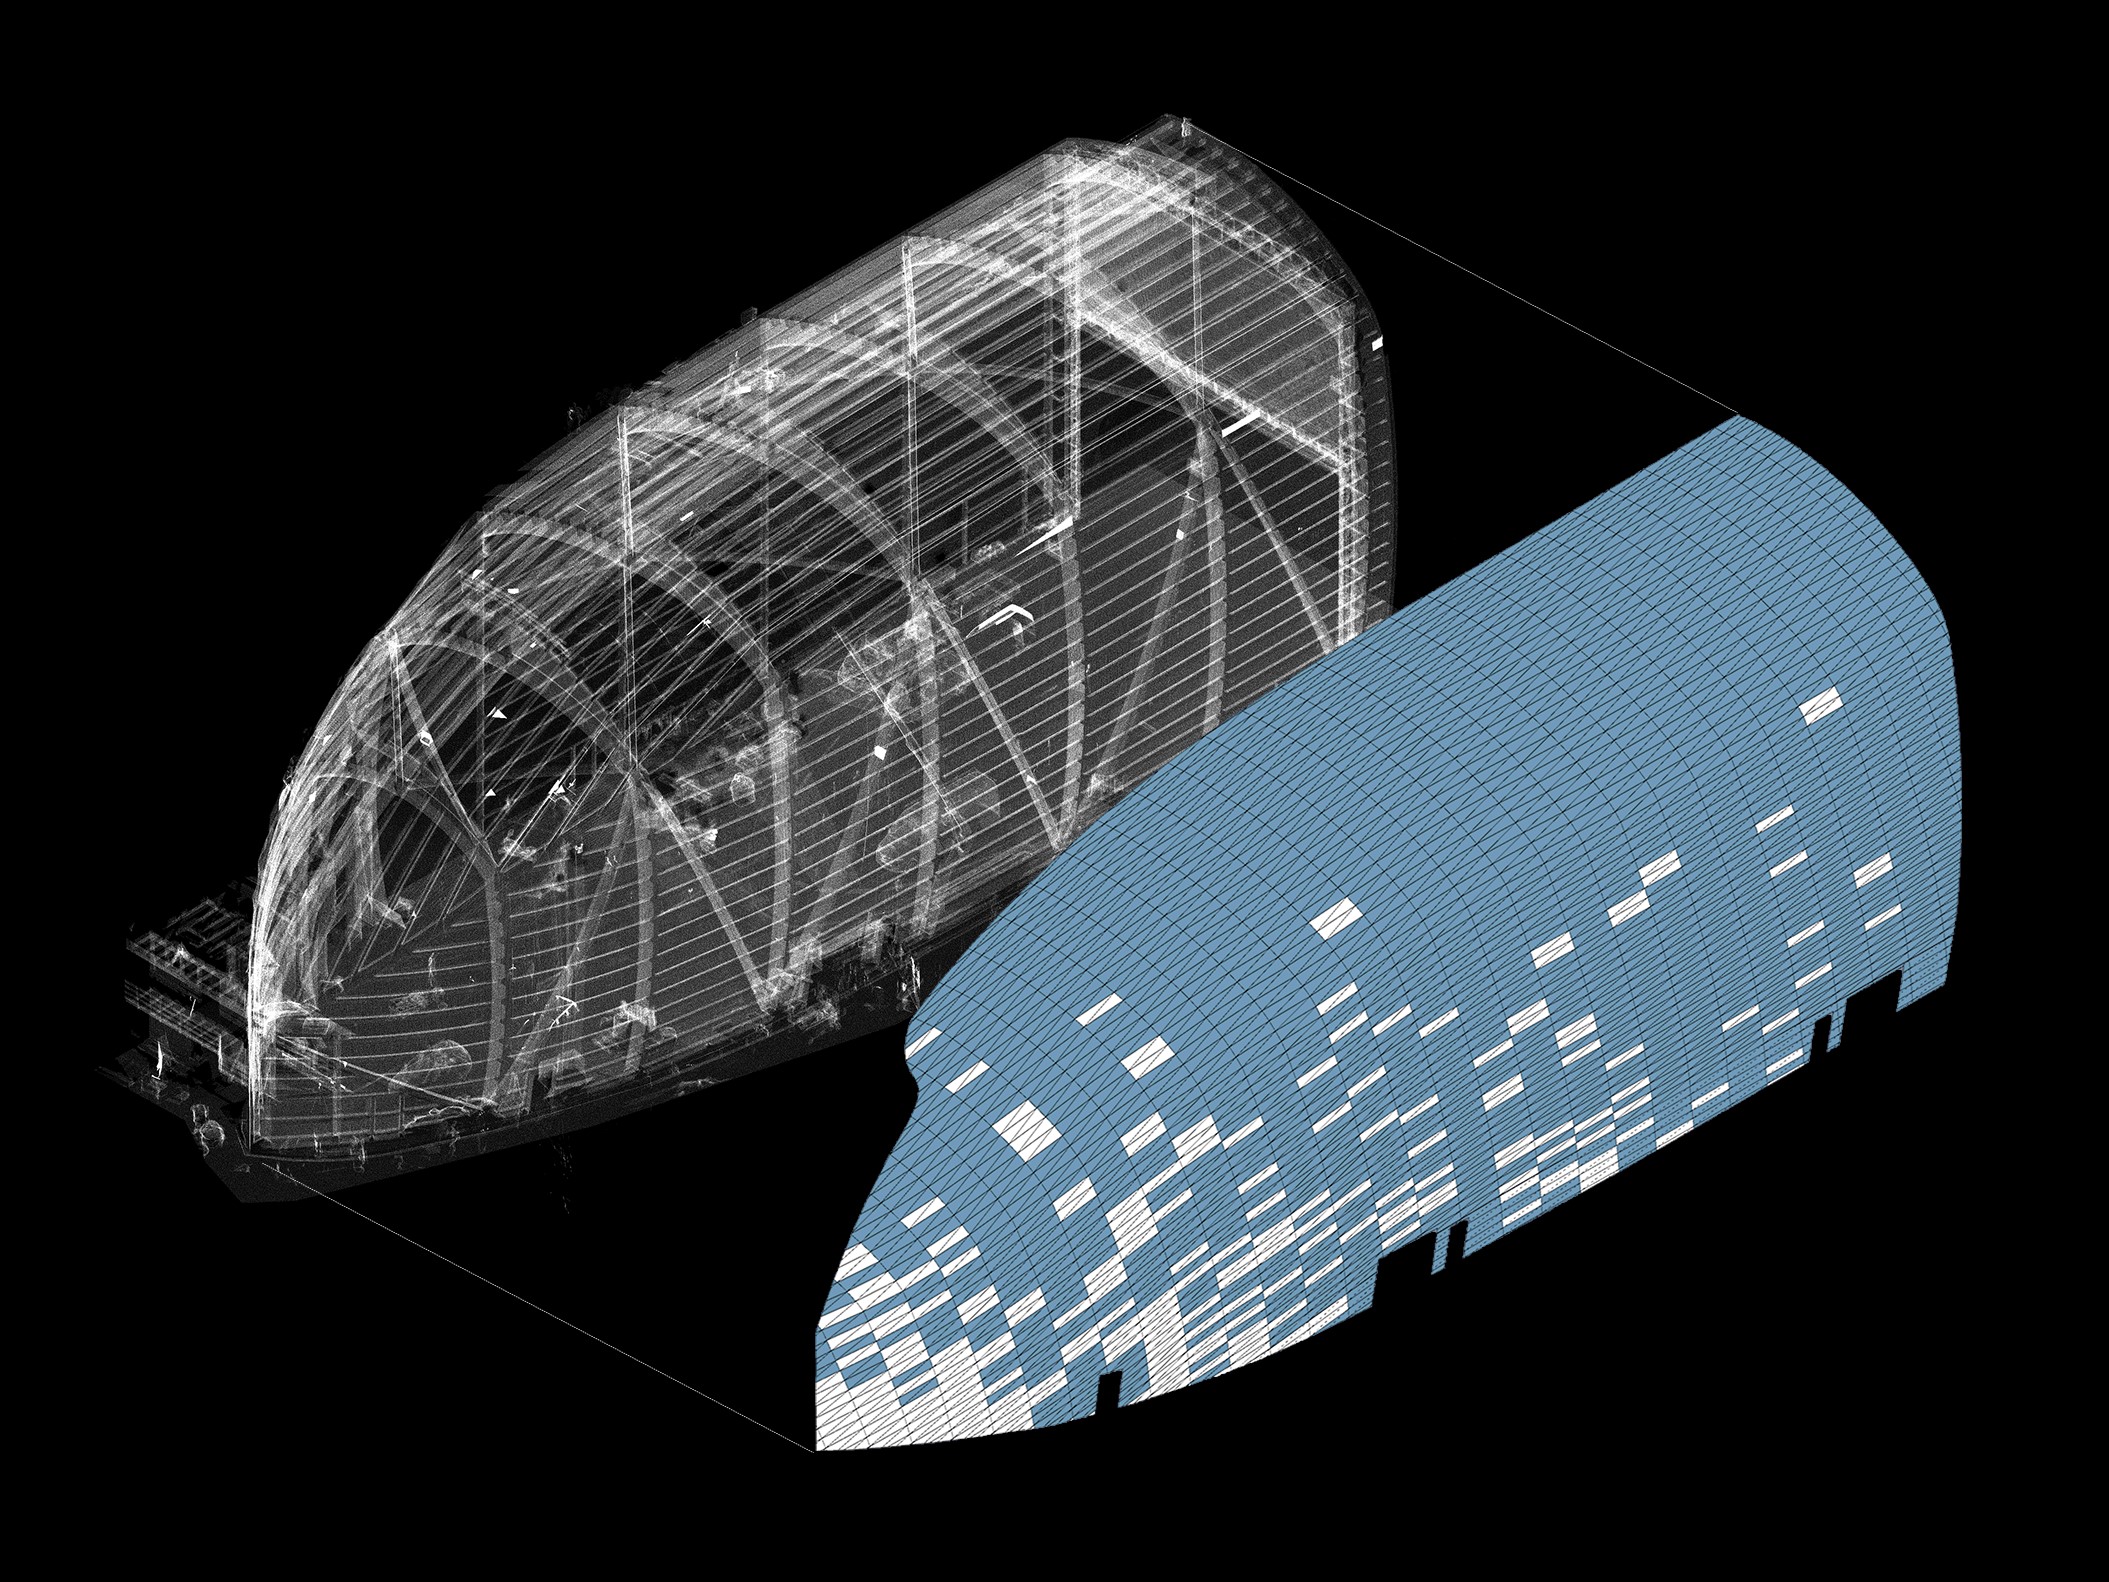 Point cloud data of the construction site with the design paneling of Breaking Wave overlayed